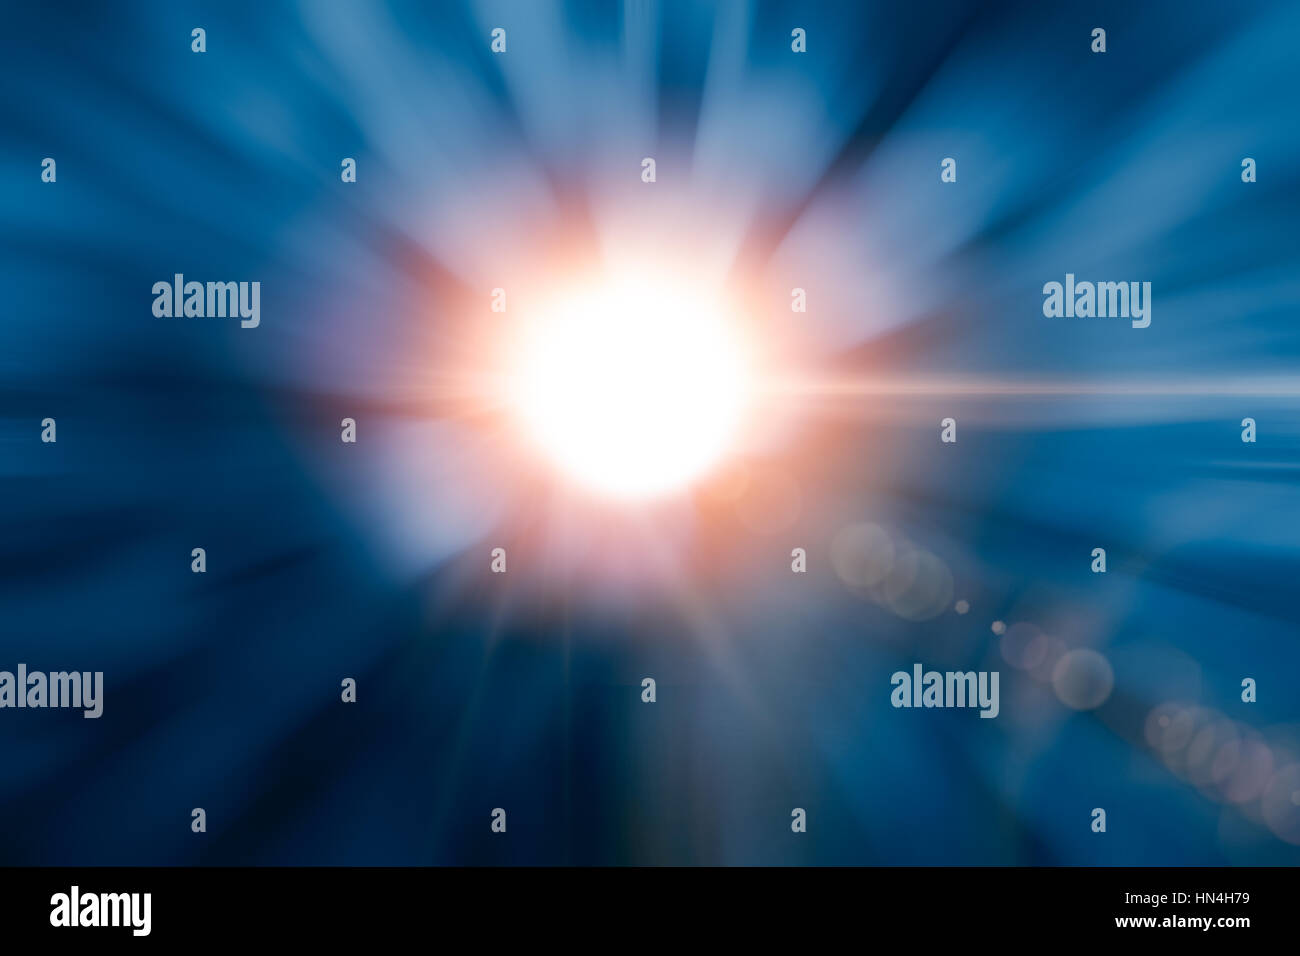 Way out move light hole flare, Acceleration super fast speed motion background for design. Stock Photo